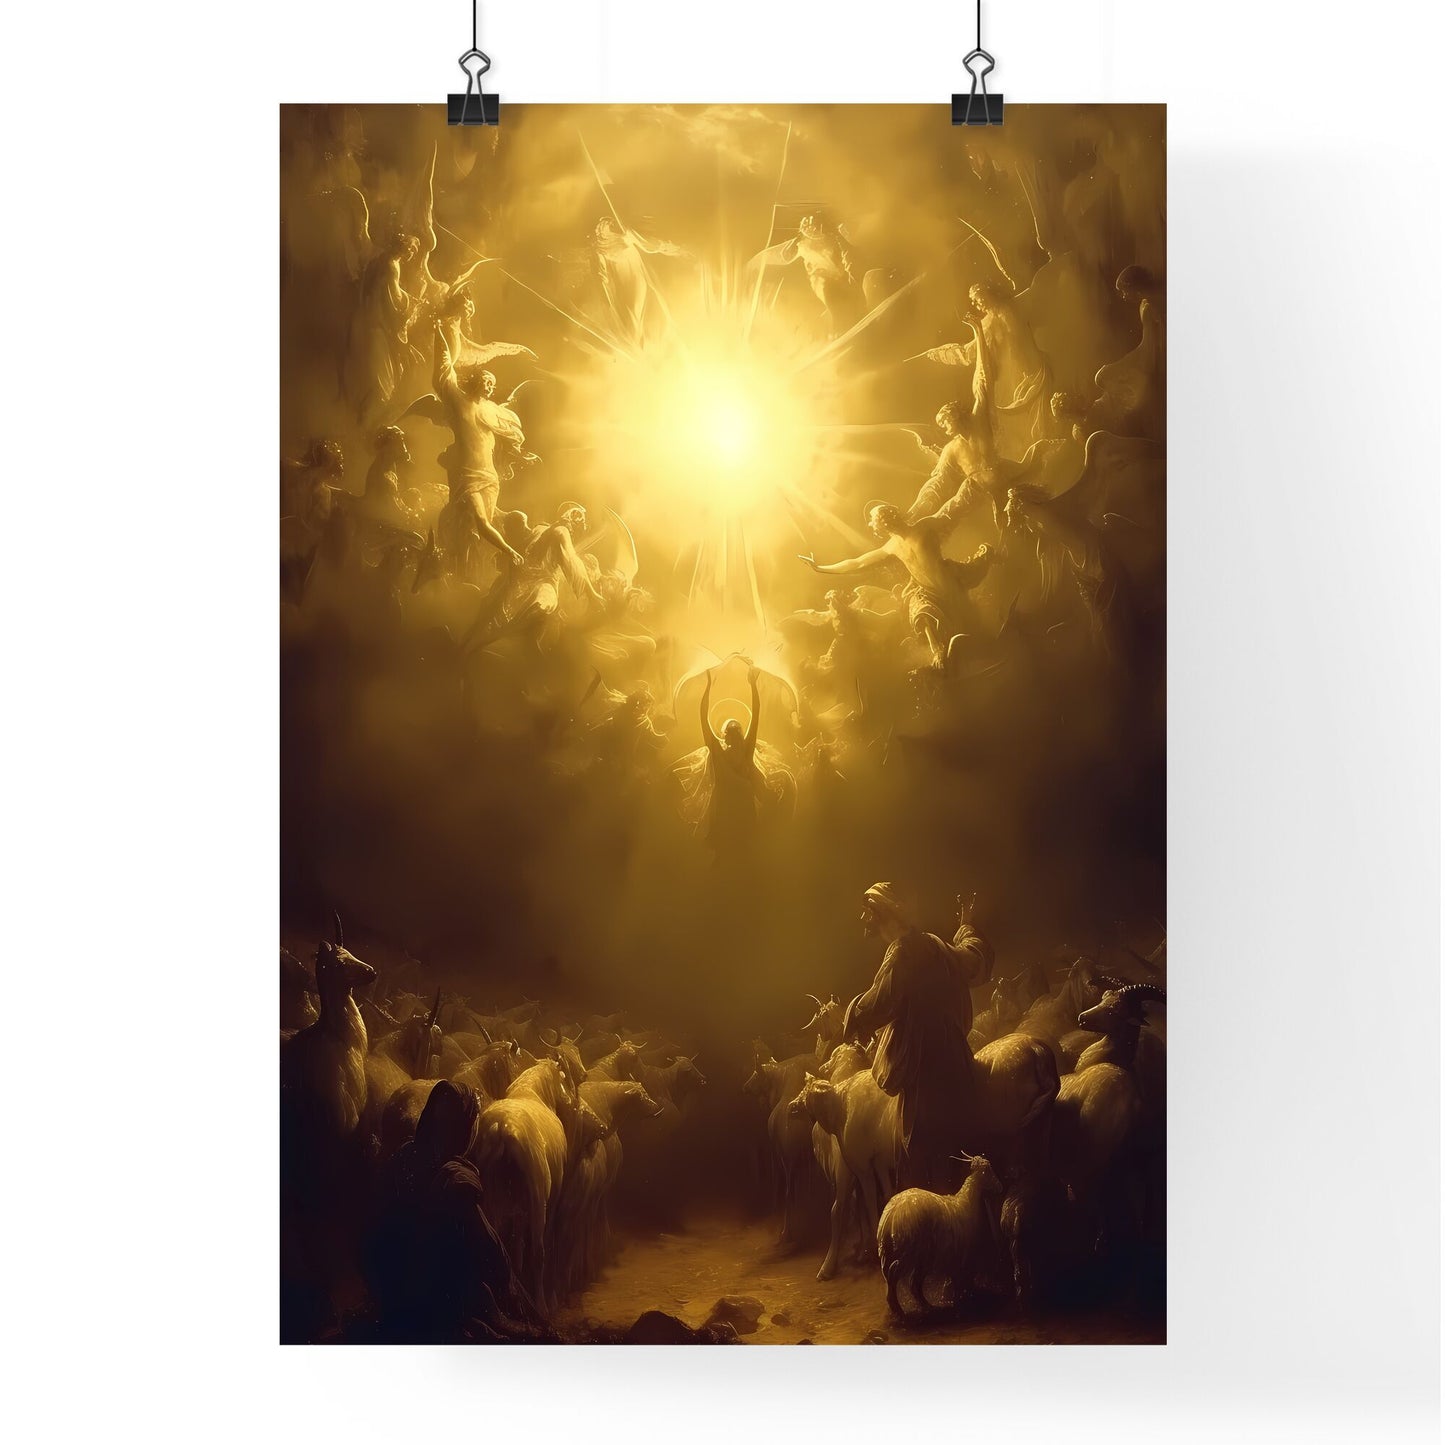 Moses prophet of God herding the flock in the desert, looking up at the sky - Art print of a painting of a group of angels and a group of goats Default Title